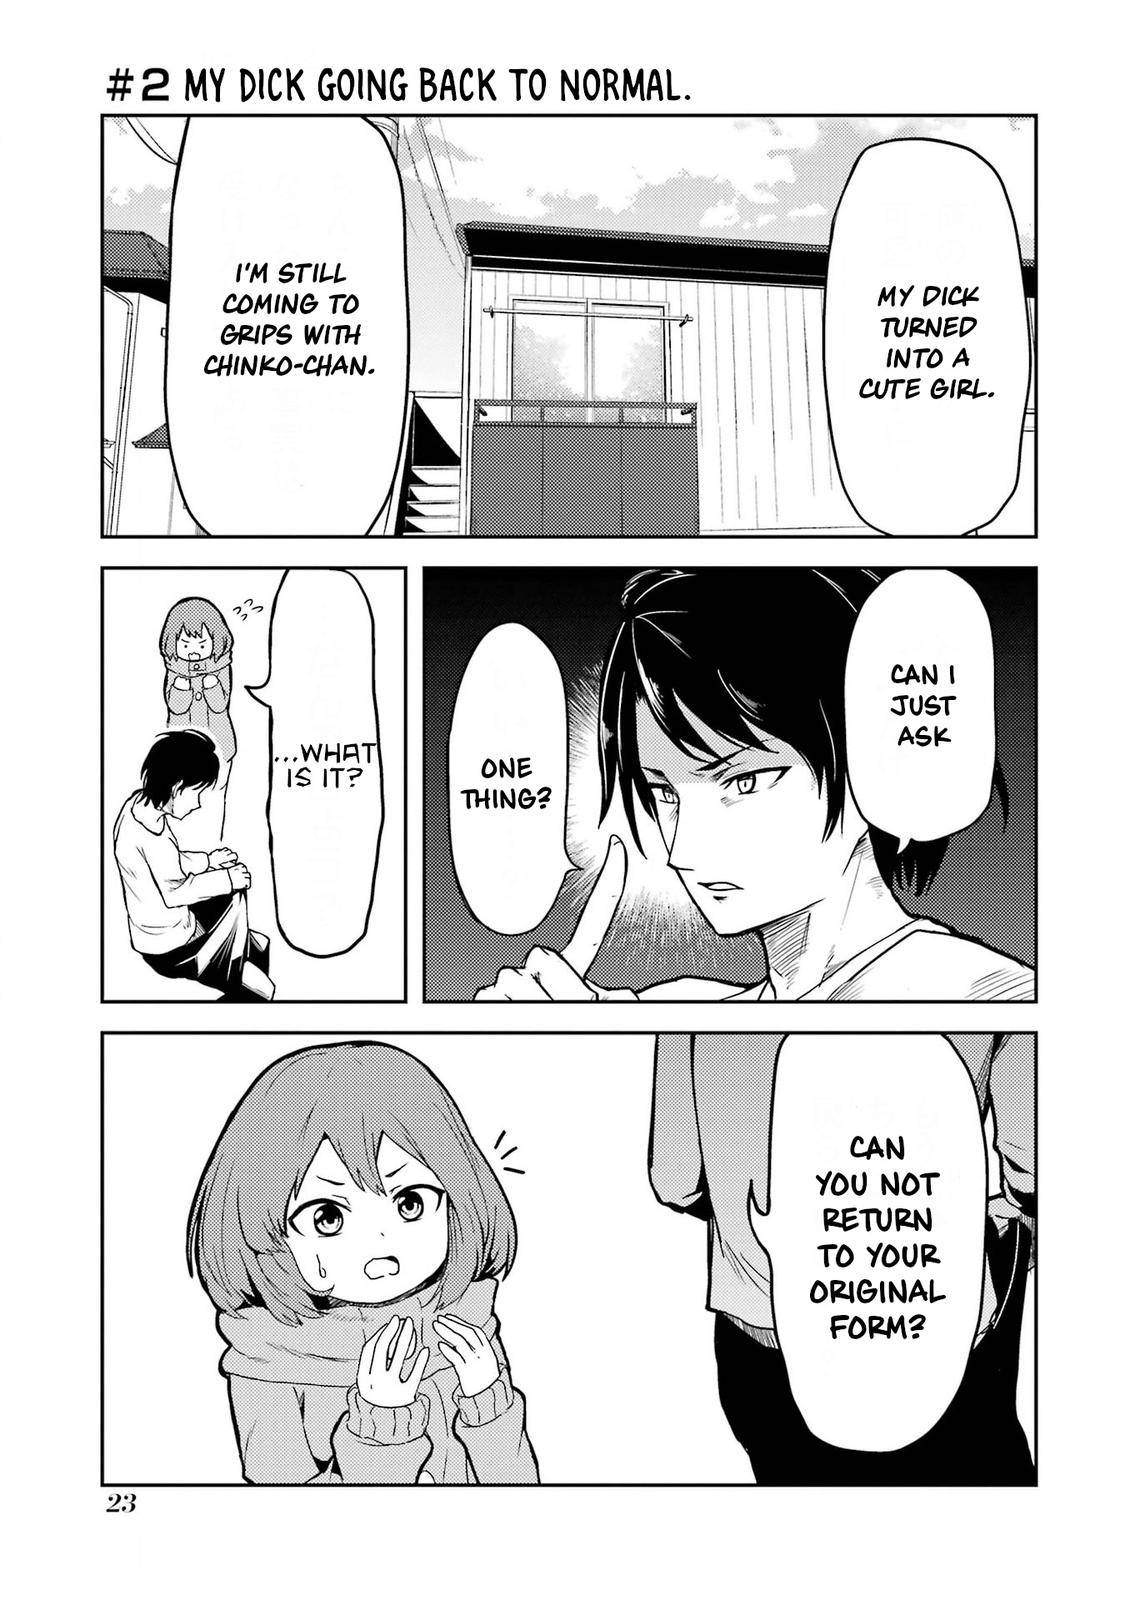 Turns Out My Dick Was a Cute Girl - chapter 2 - #1